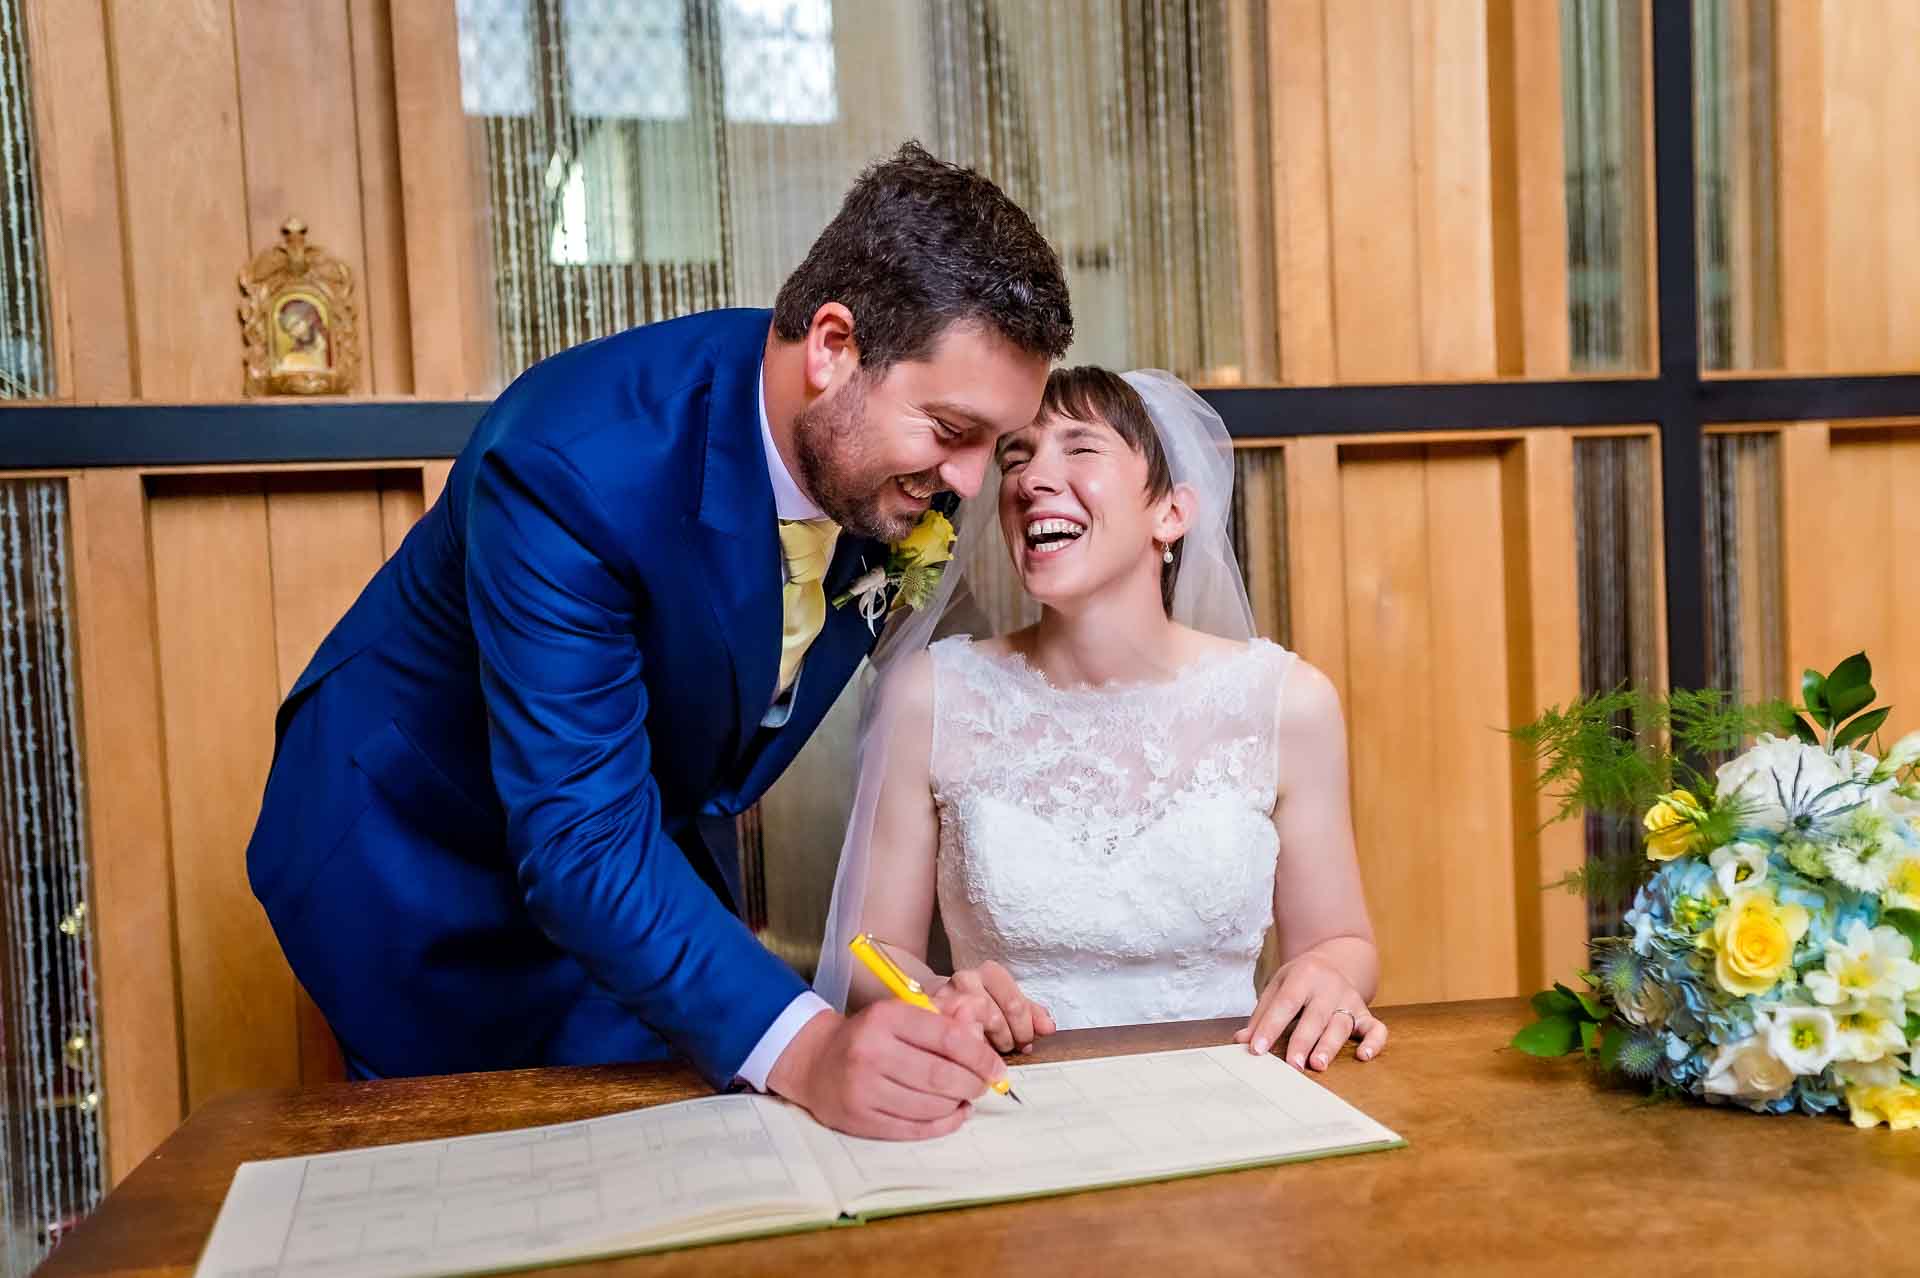 Bride laughing as groom pretends to sign the register at church wedding